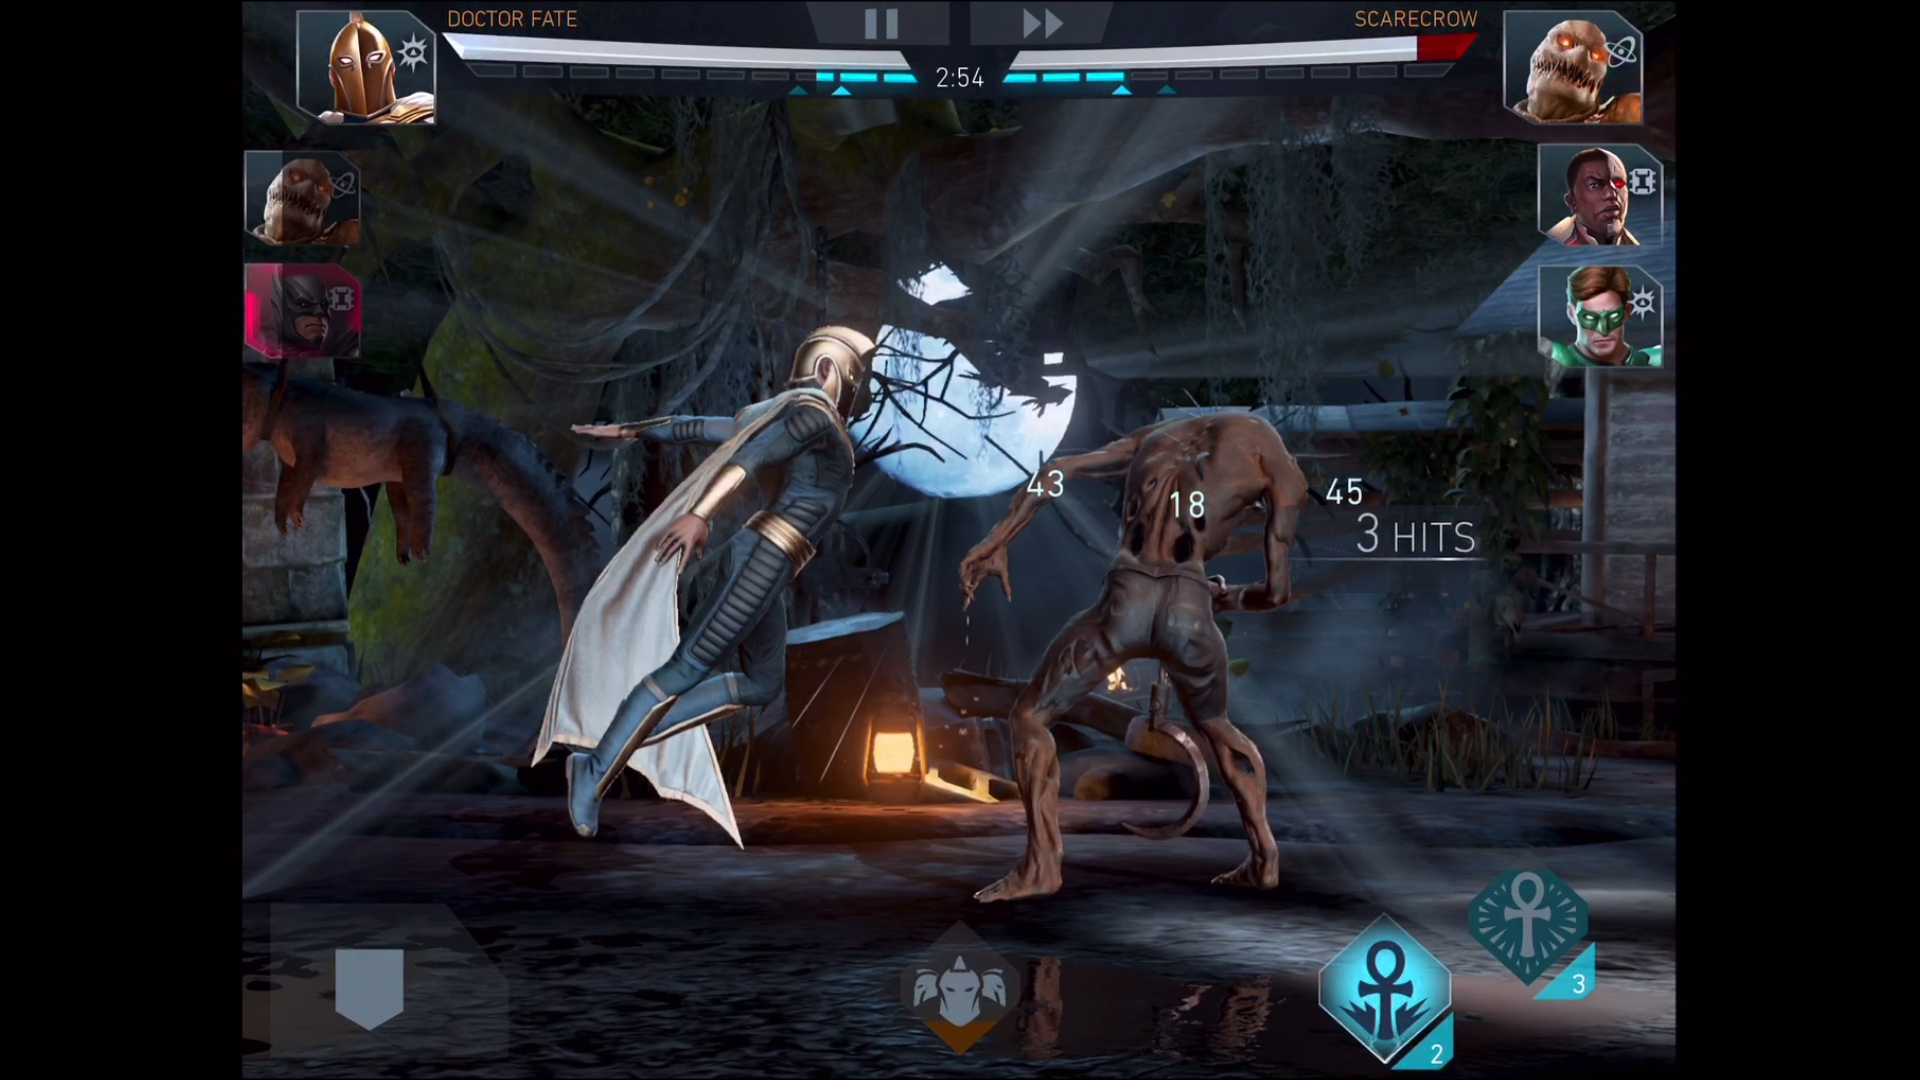 Injustice 2’s Mobile Game Is A Little Rough, But It Will Do